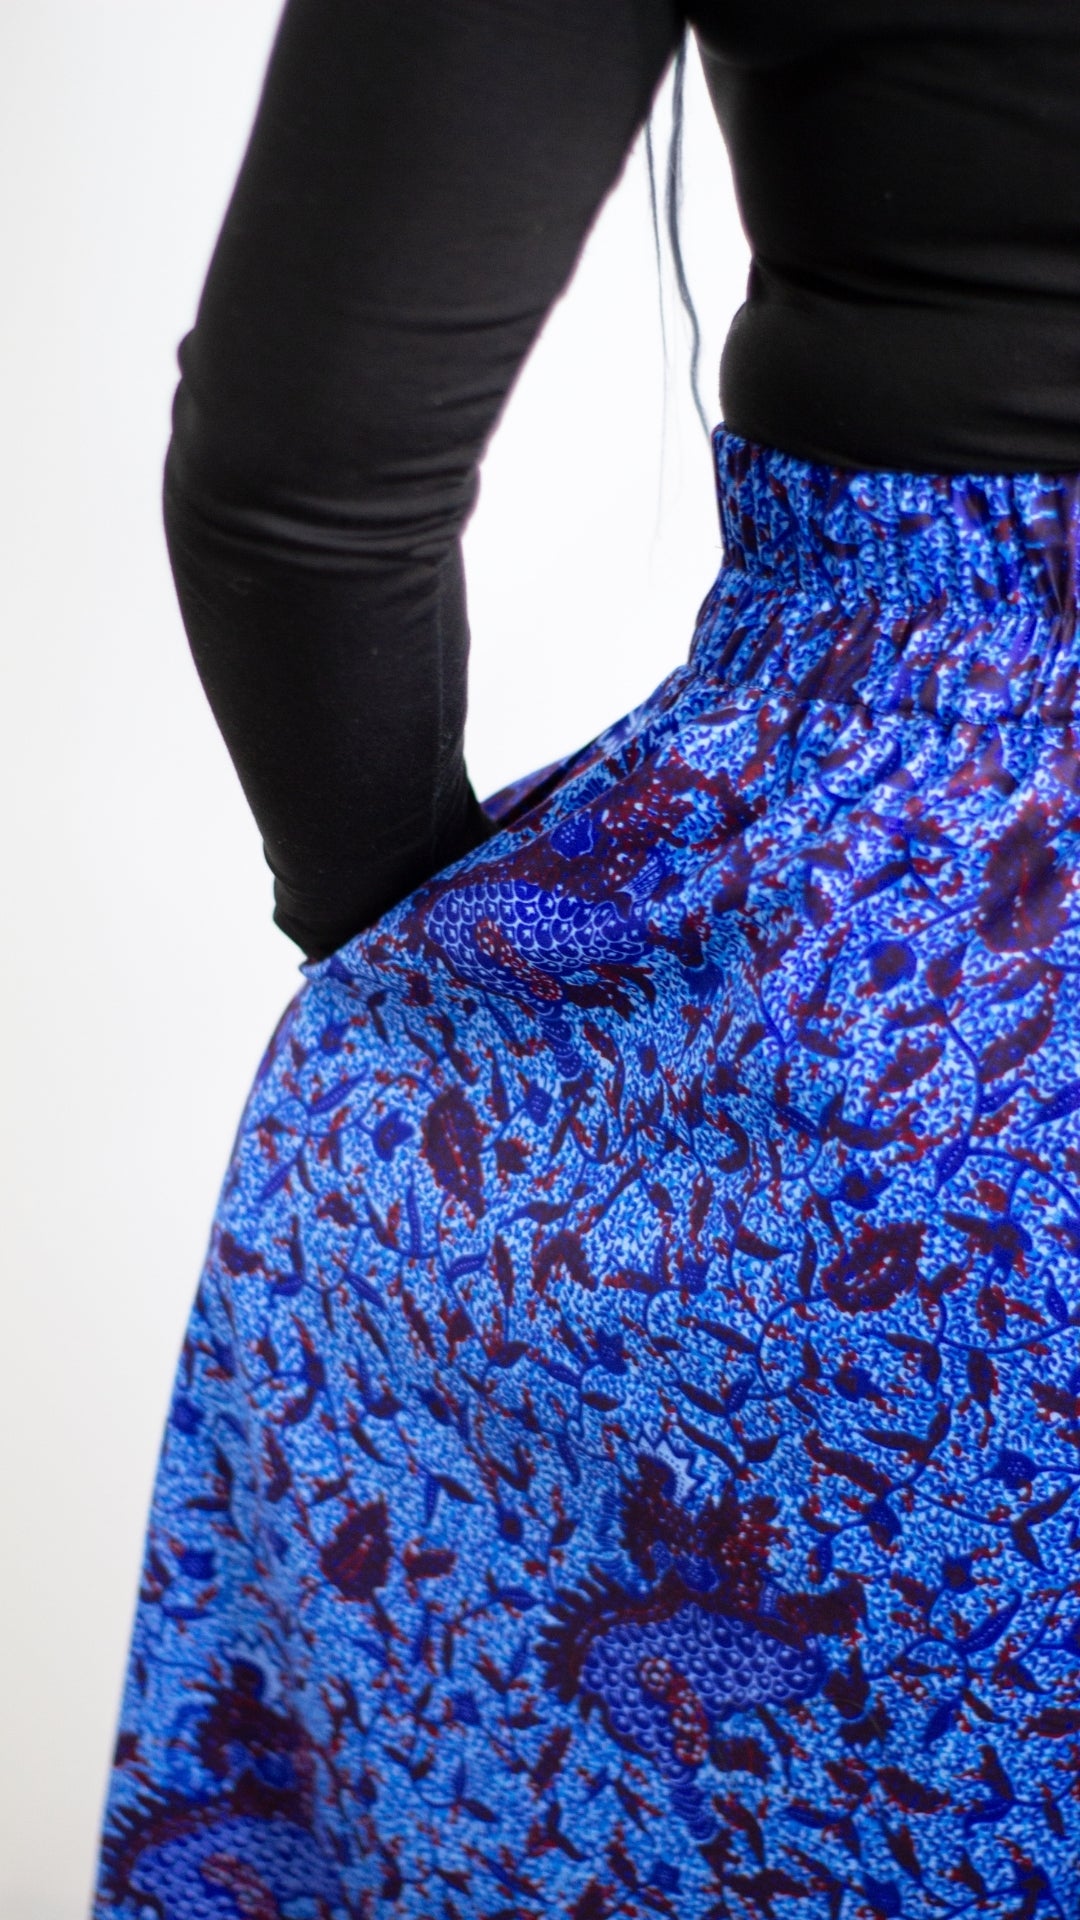 Model's hand placed in the deep hidden pocket of the botanical blue print skirt.